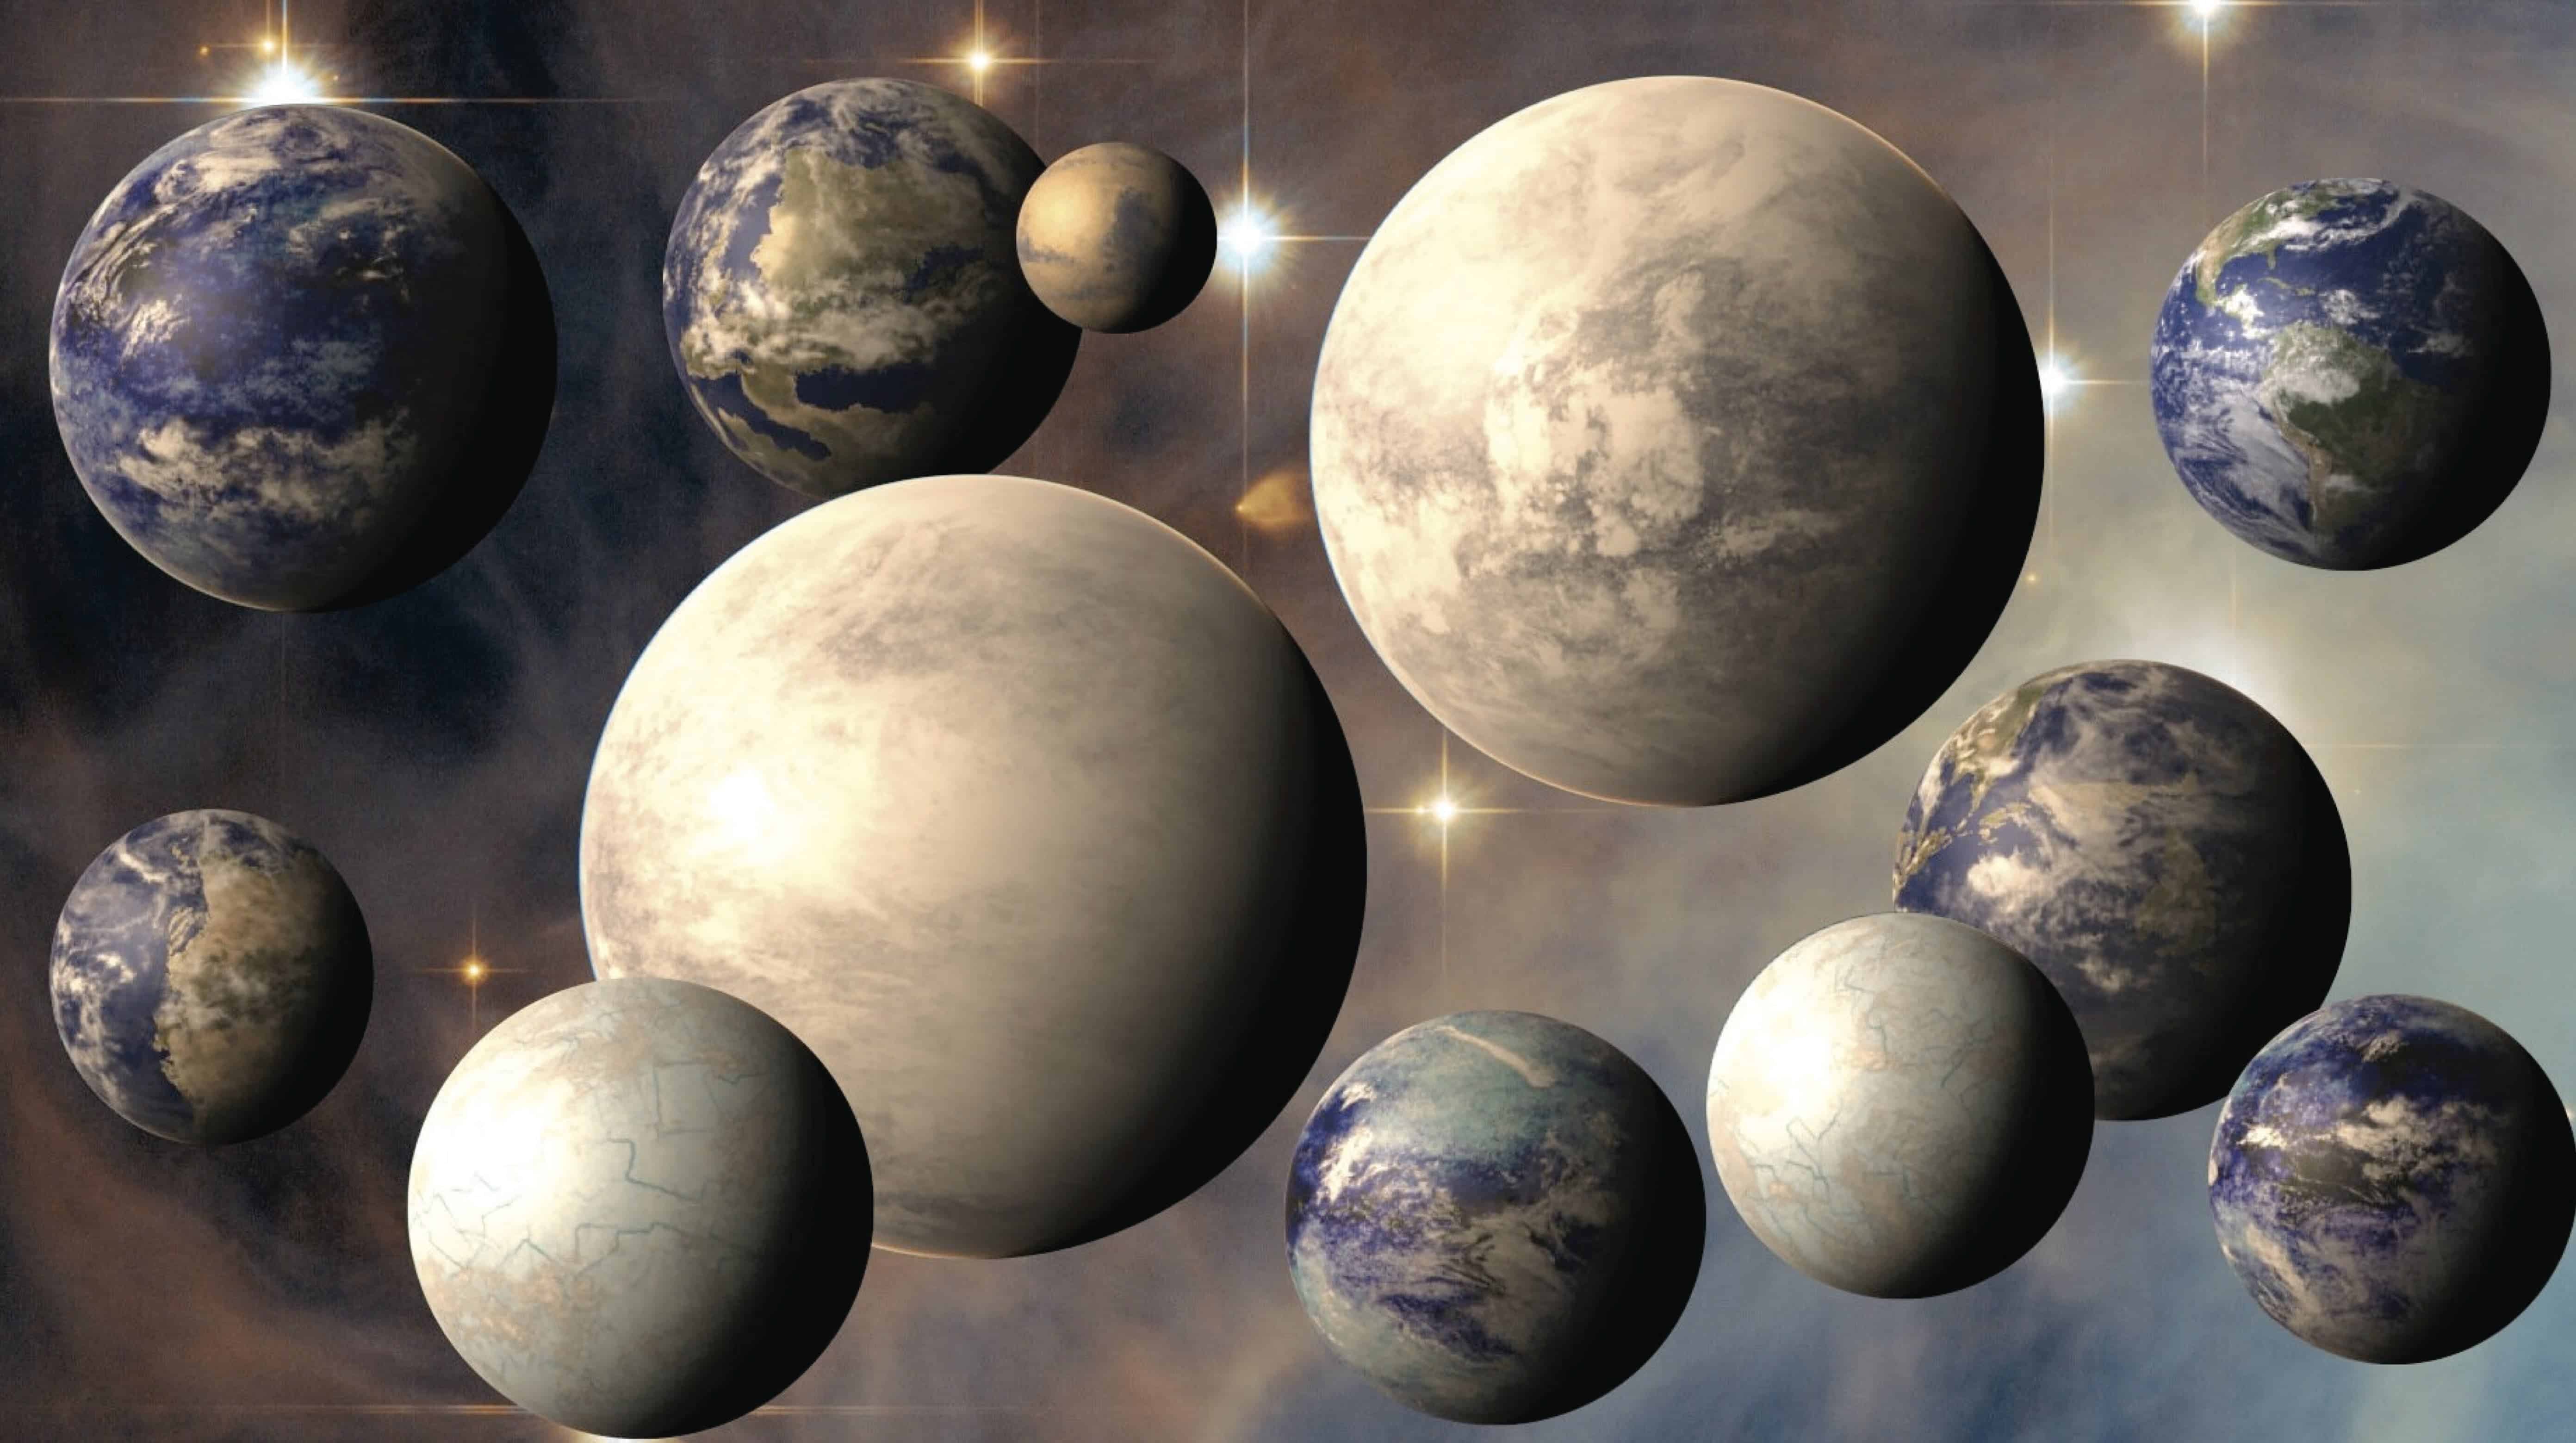 15 new planets discovered -- one is potentially habitable